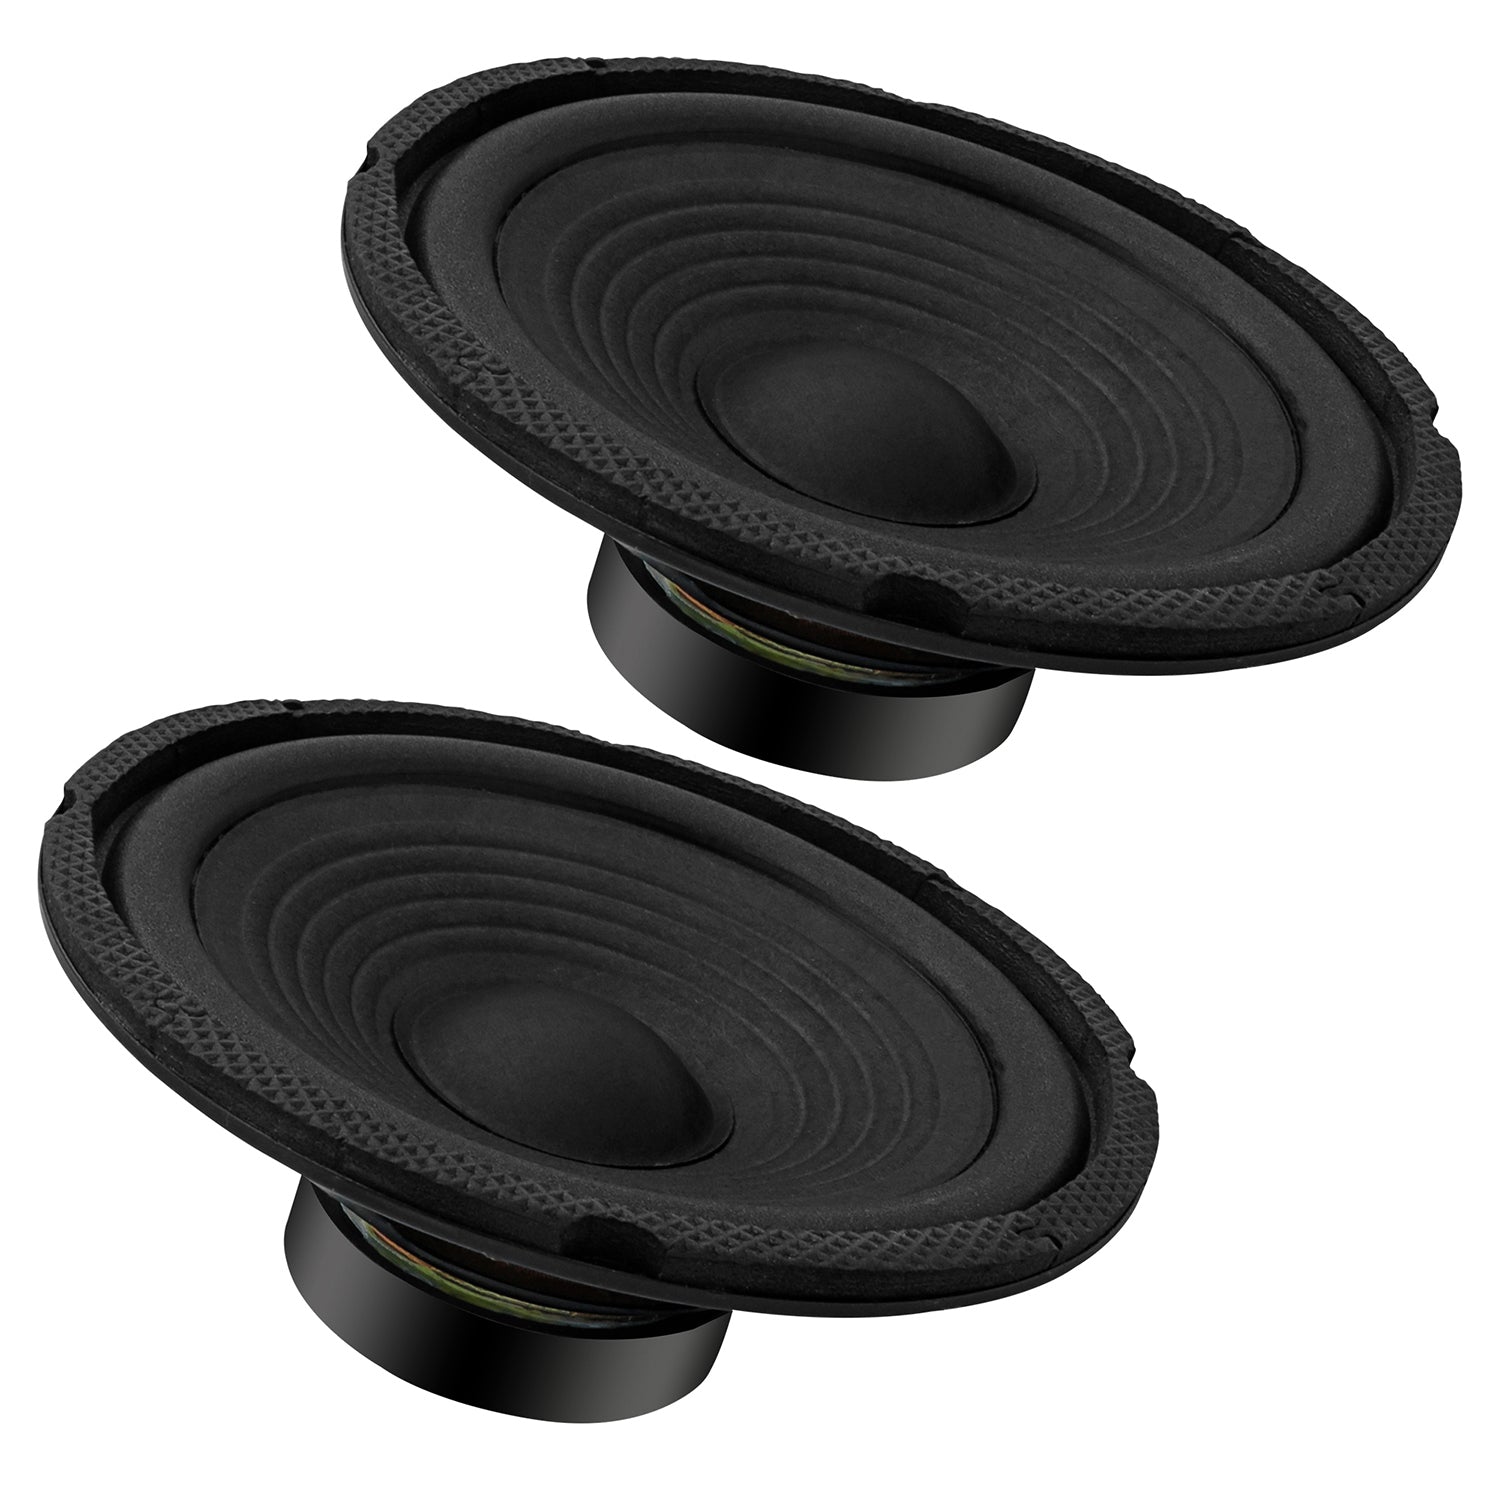 5 Core 6 Inch Subwoofer Speaker • 300W Peak Power • 4 Ohm Replacement Car Bass Sub Woofer 2/4 Pack